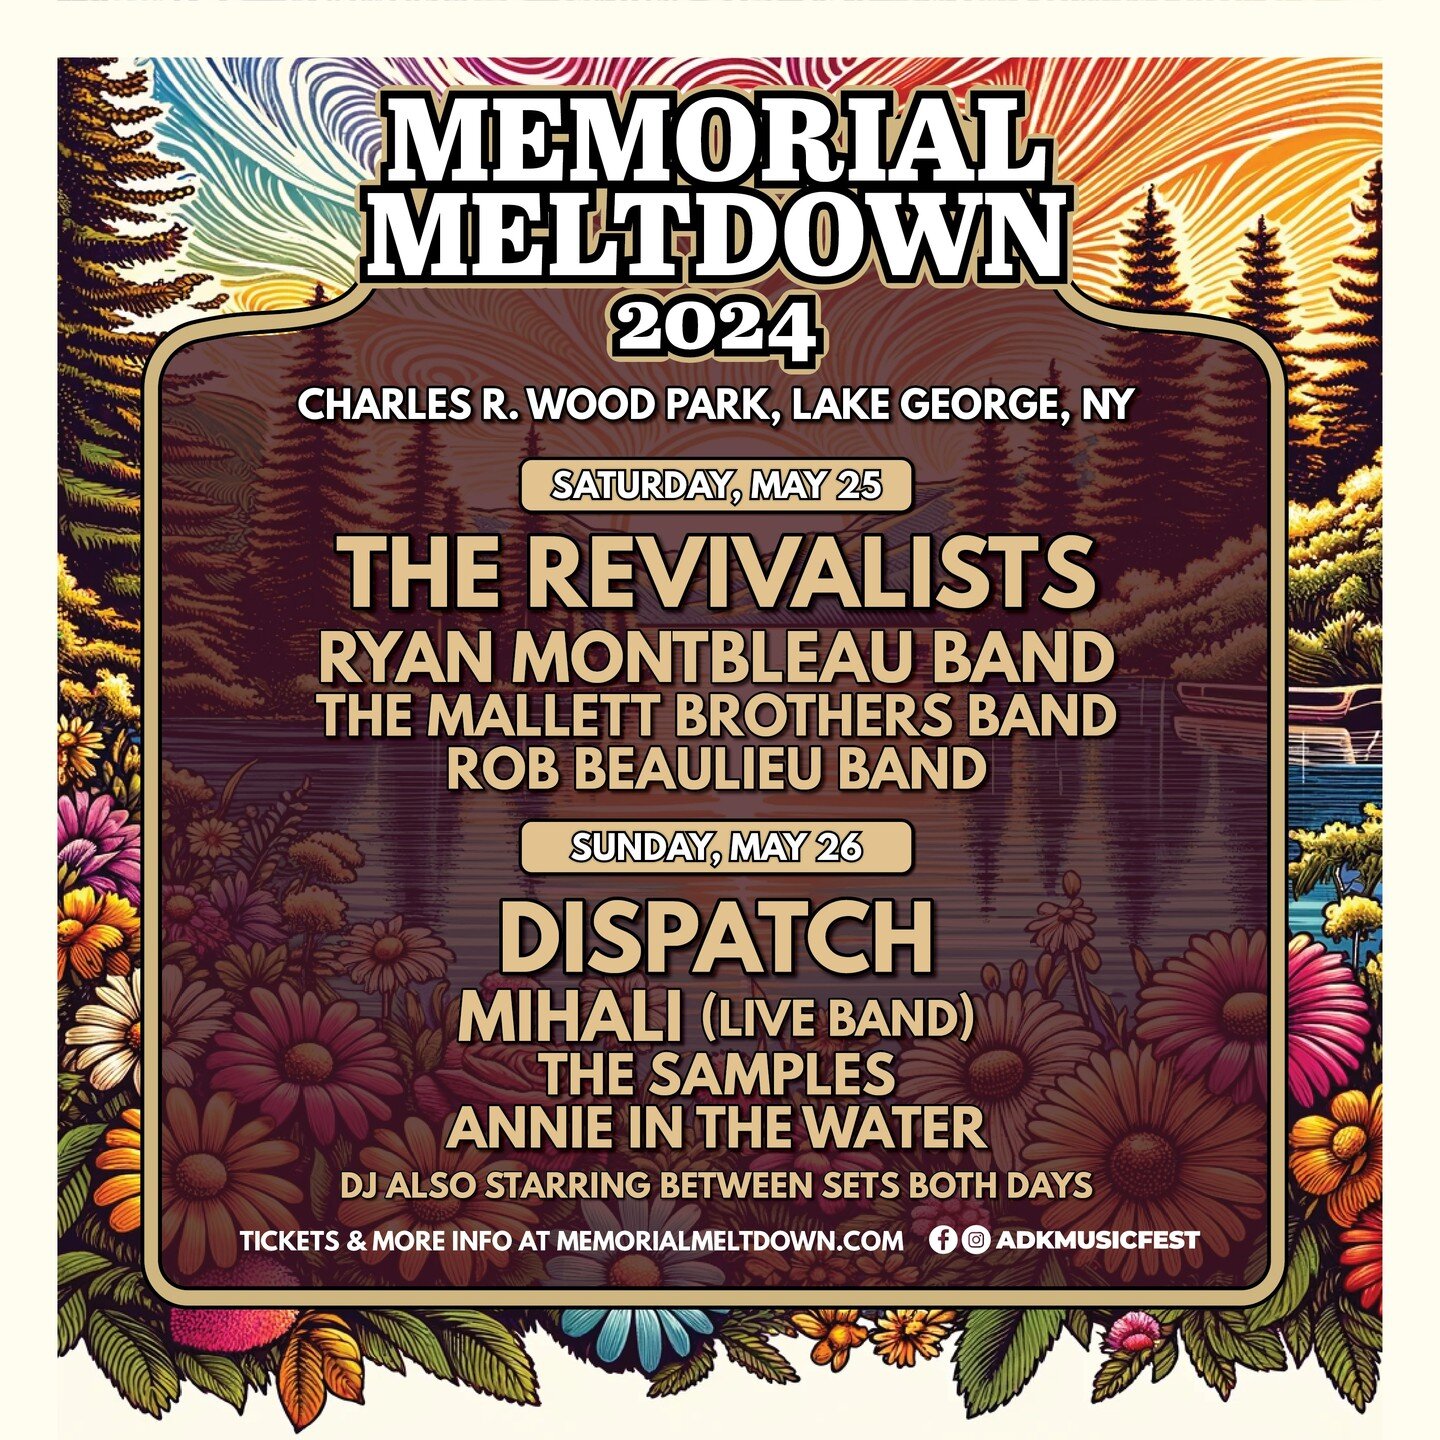 We are super excited to be a part of the 2024 Memorial Meltdown! Check out this amazing line up and get your tickets NOW! Ticket Link: https://bit.ly/Meltdown24